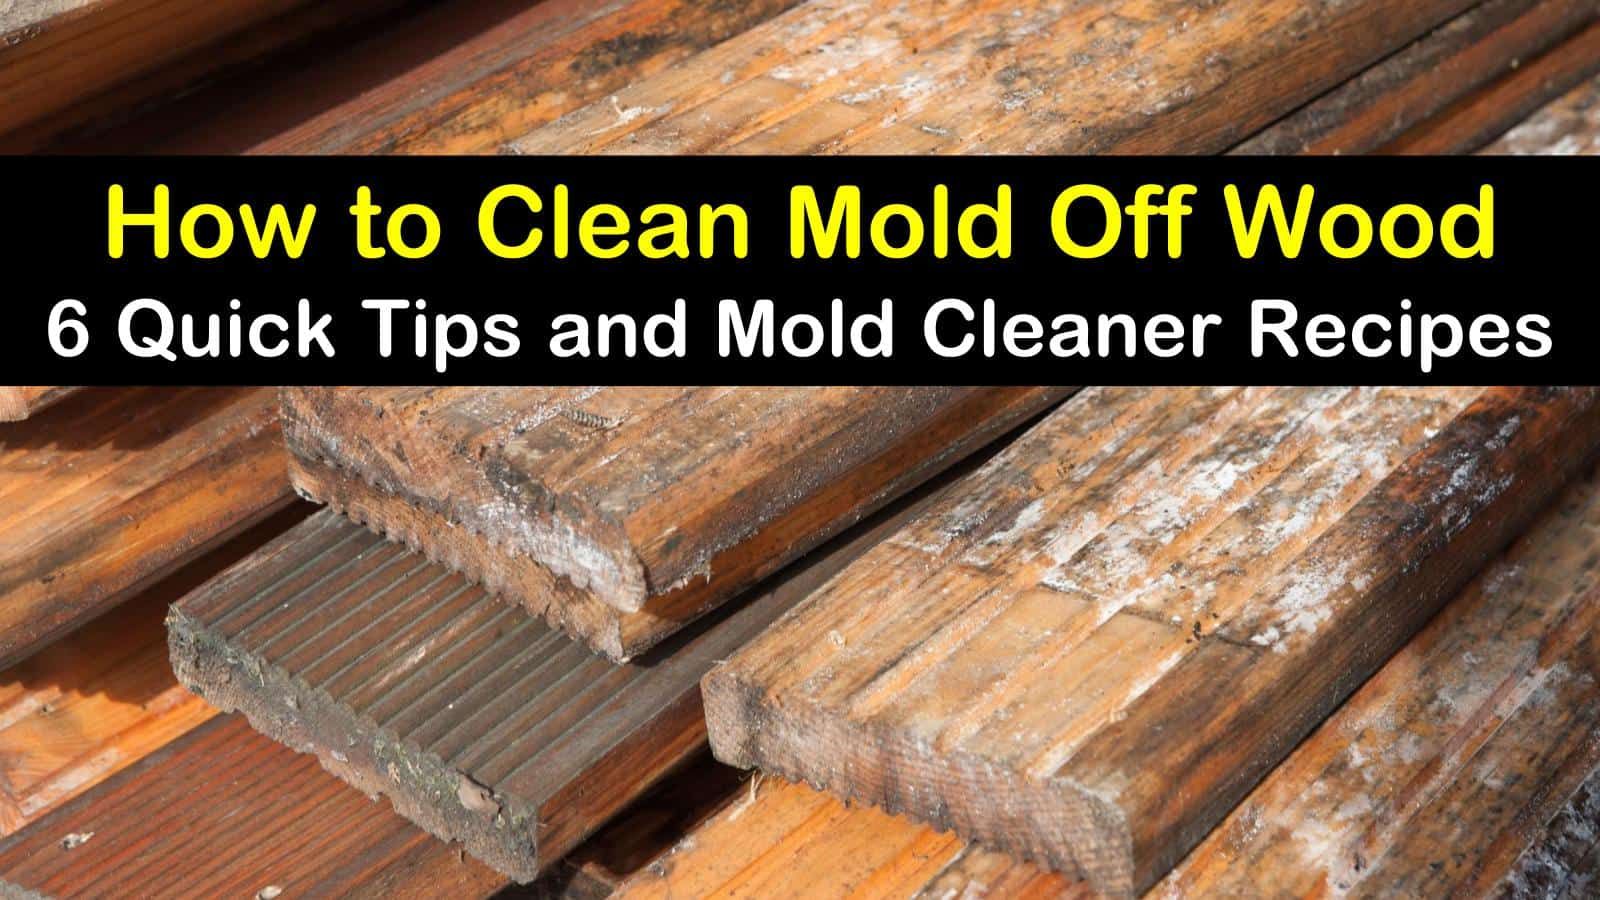 6 Quick Ways to Clean Mold Off Wood